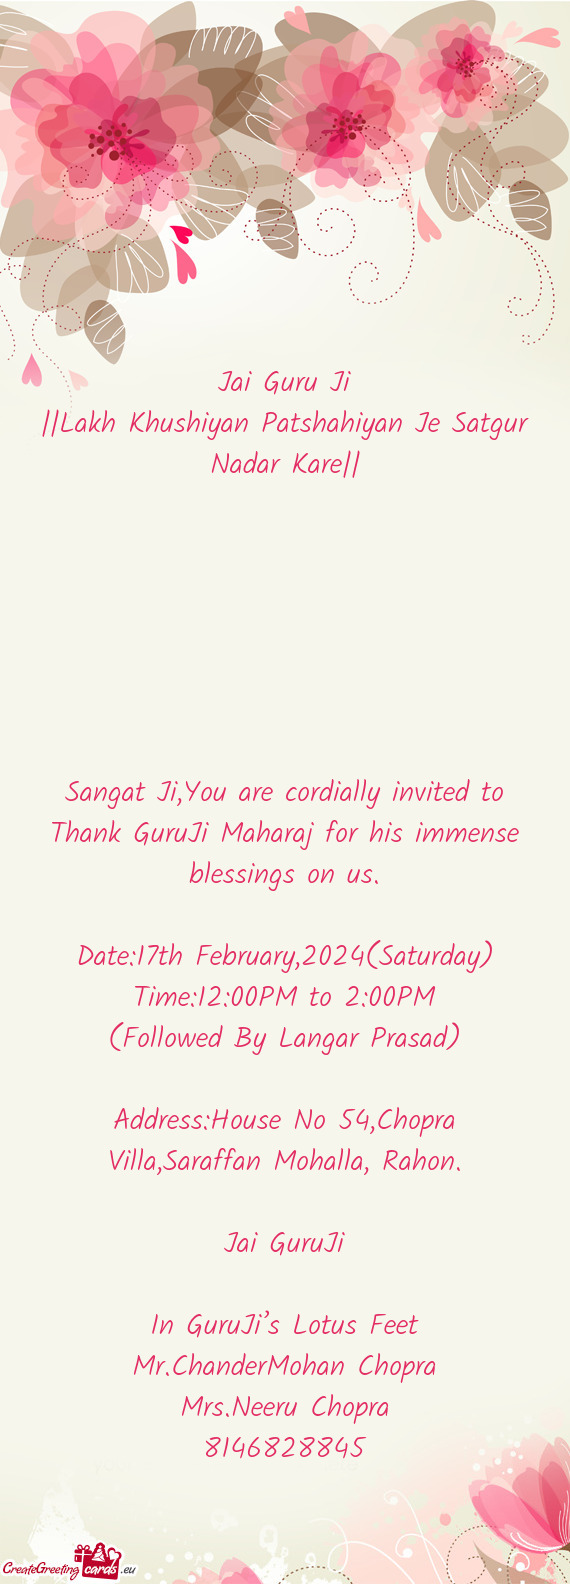 Sangat Ji,You are cordially invited to Thank GuruJi Maharaj for his immense blessings on us